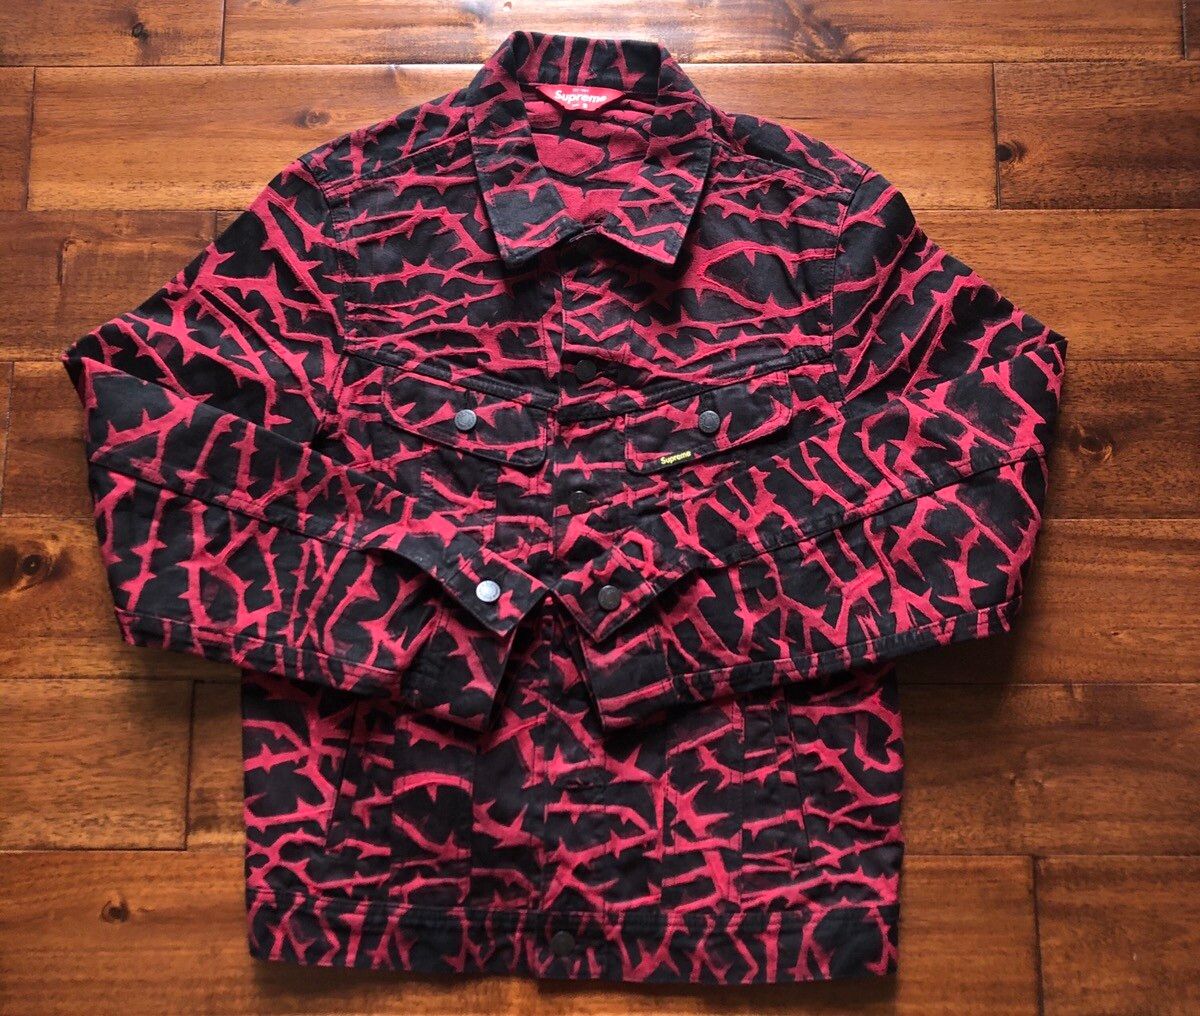 Supreme Supreme thorn trucker jacket red small | Grailed